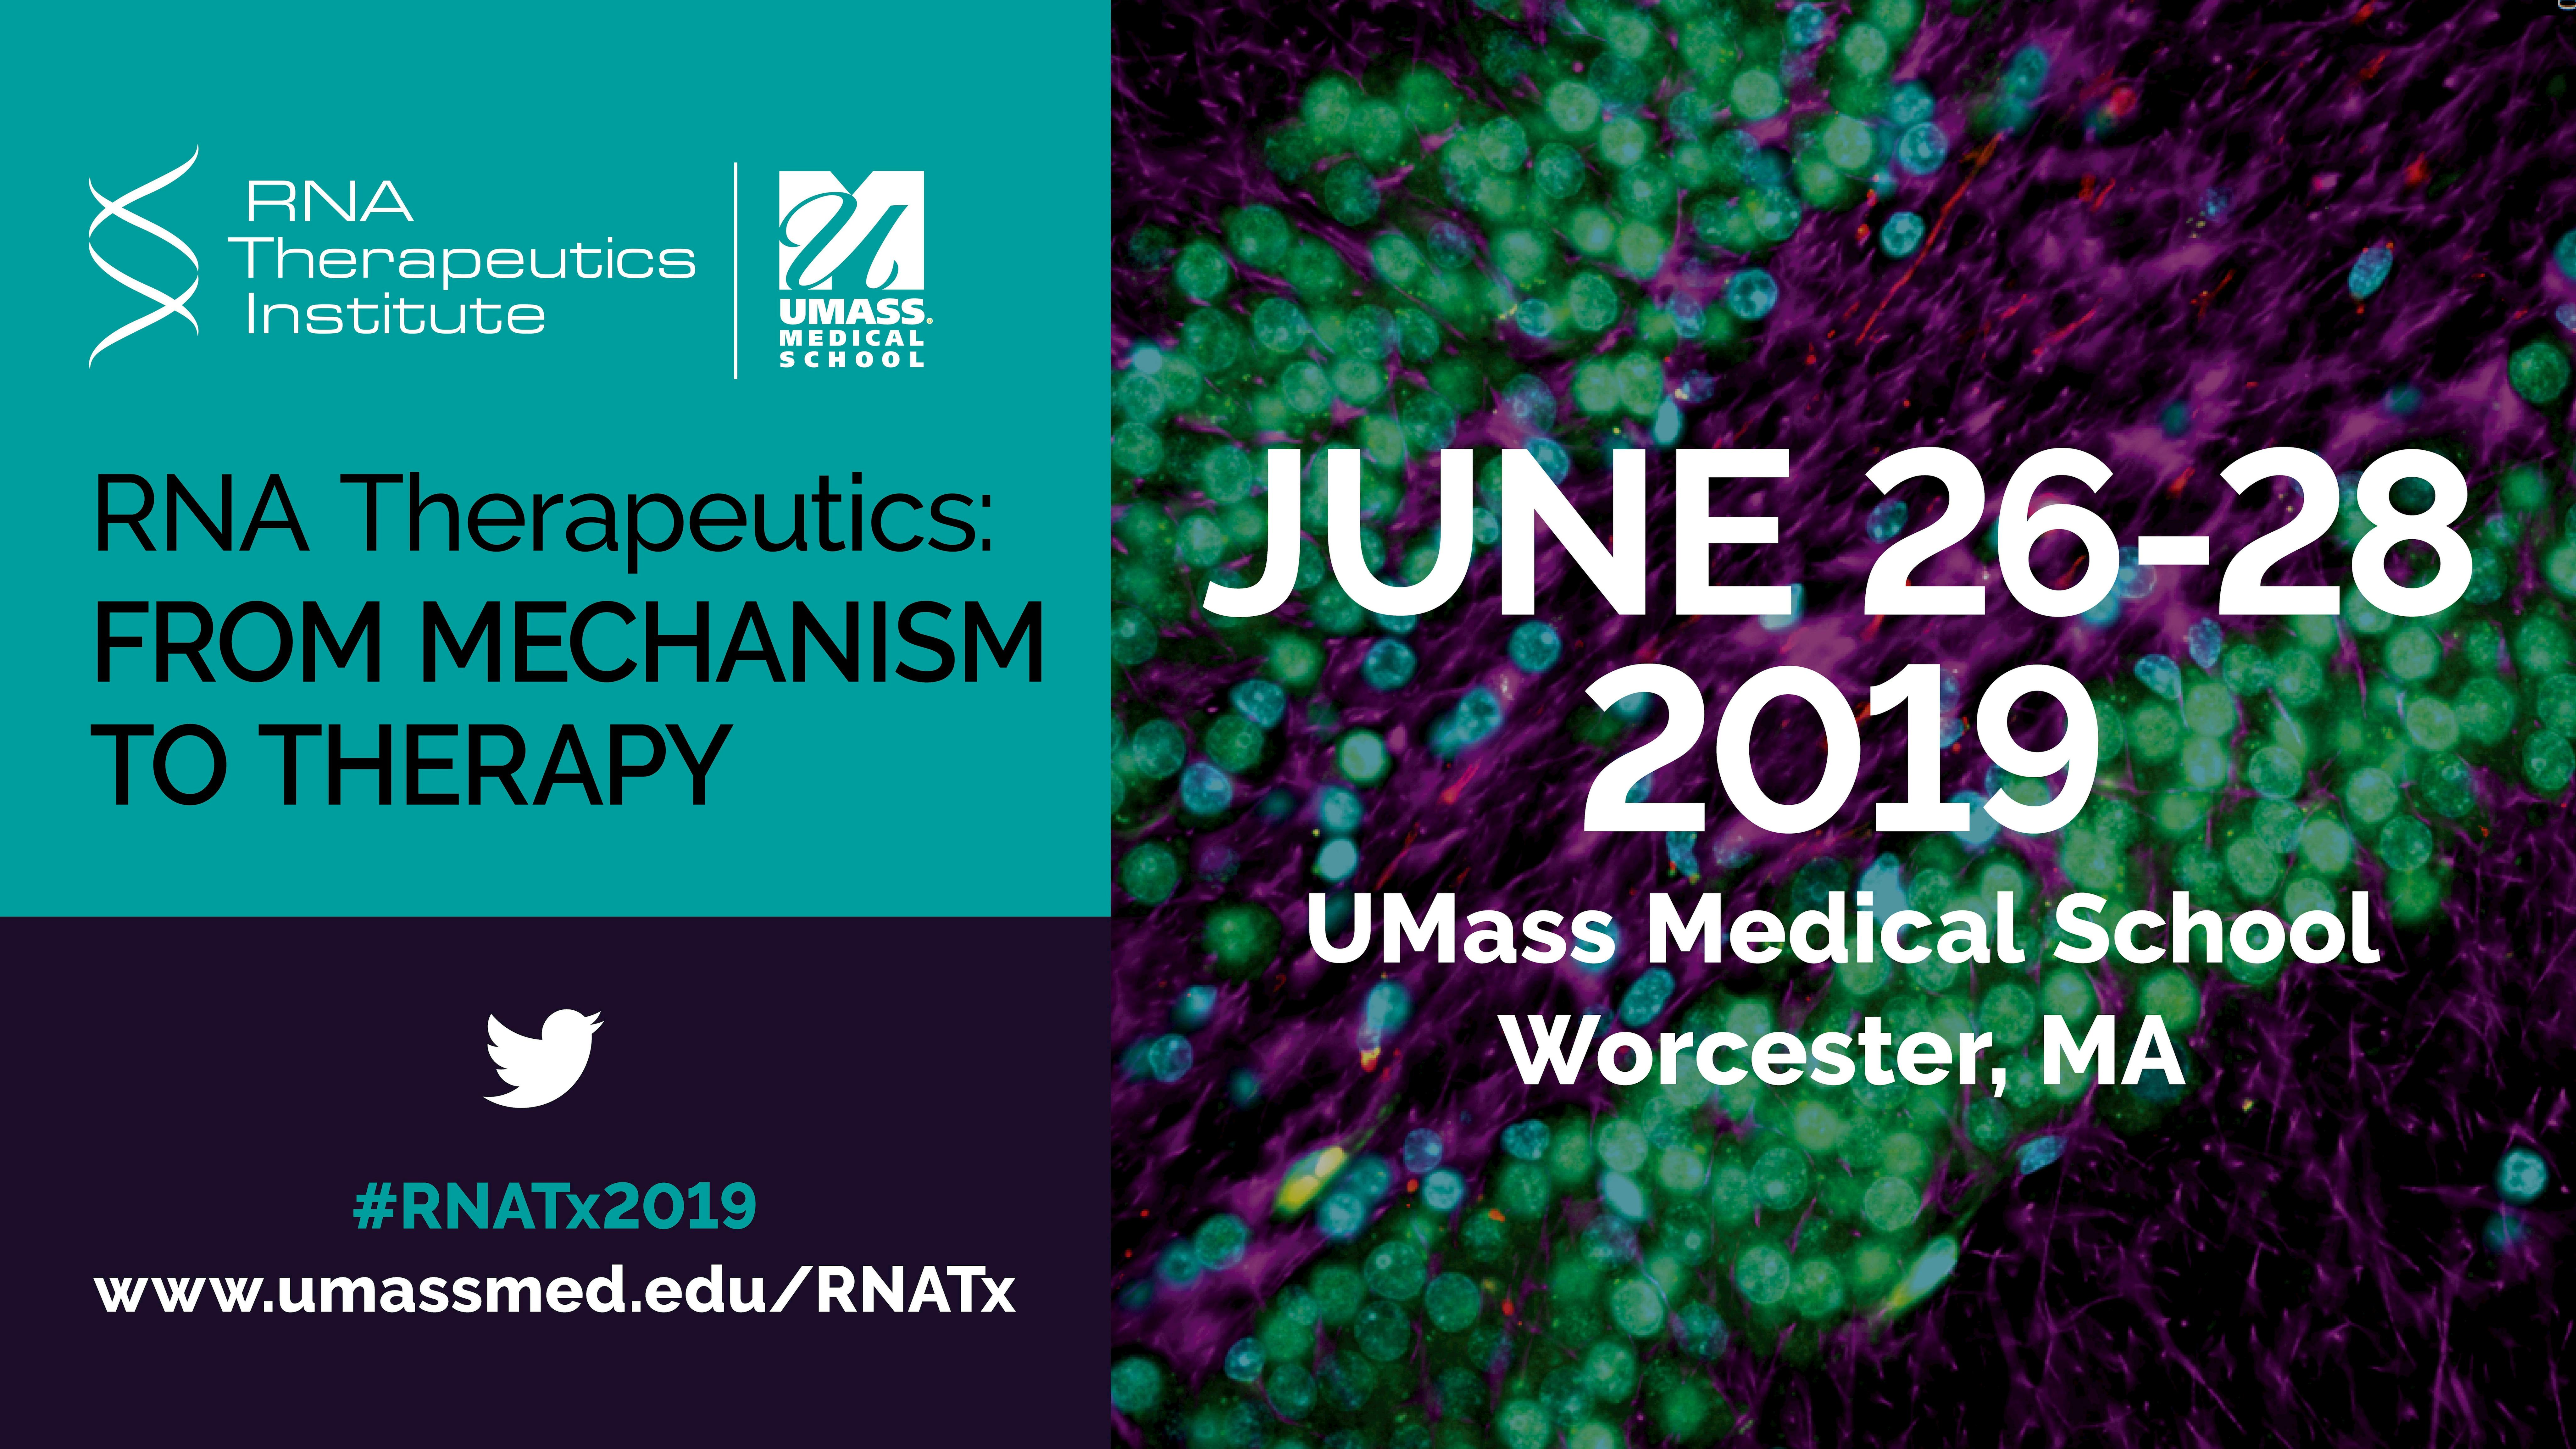 2019 RNA Therapeutics: FROM MECHANISM TO THERAPY